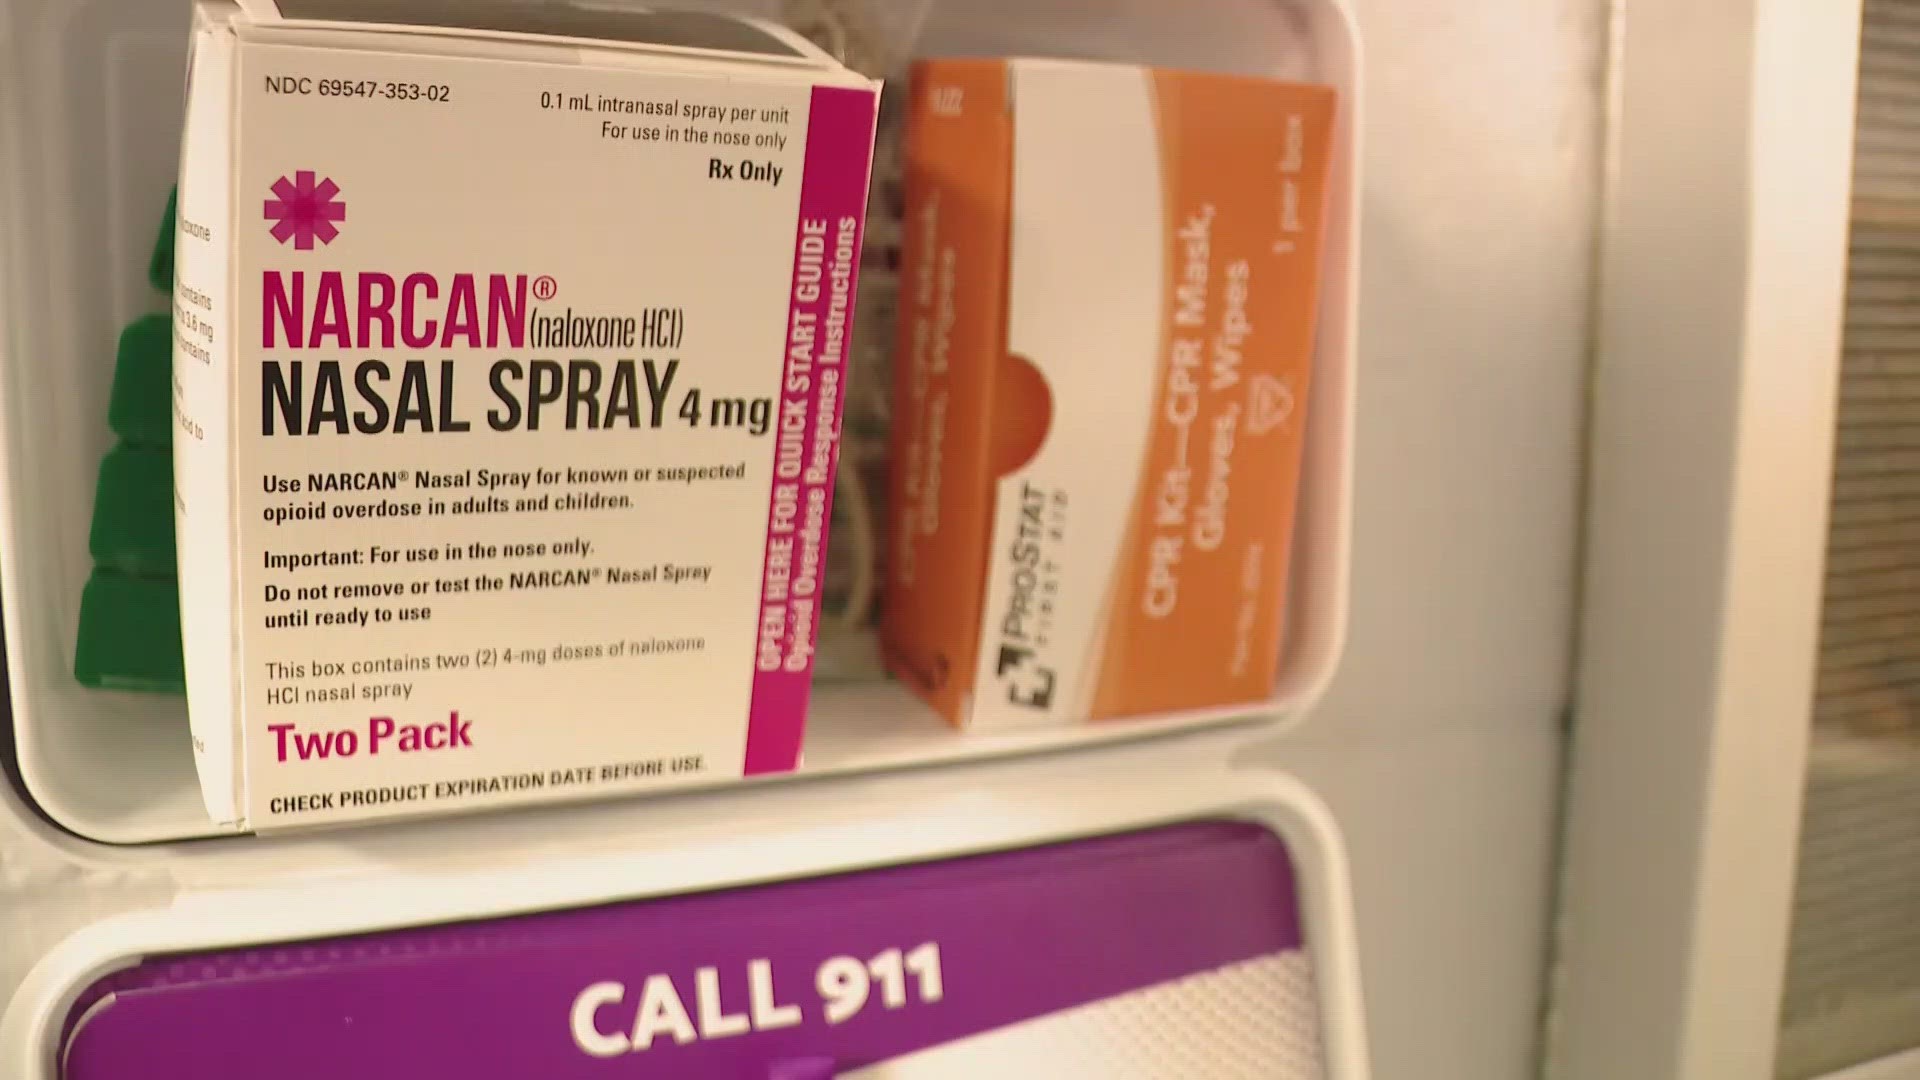 The lifesaving tool guides bystanders on how to respond to an overdose.